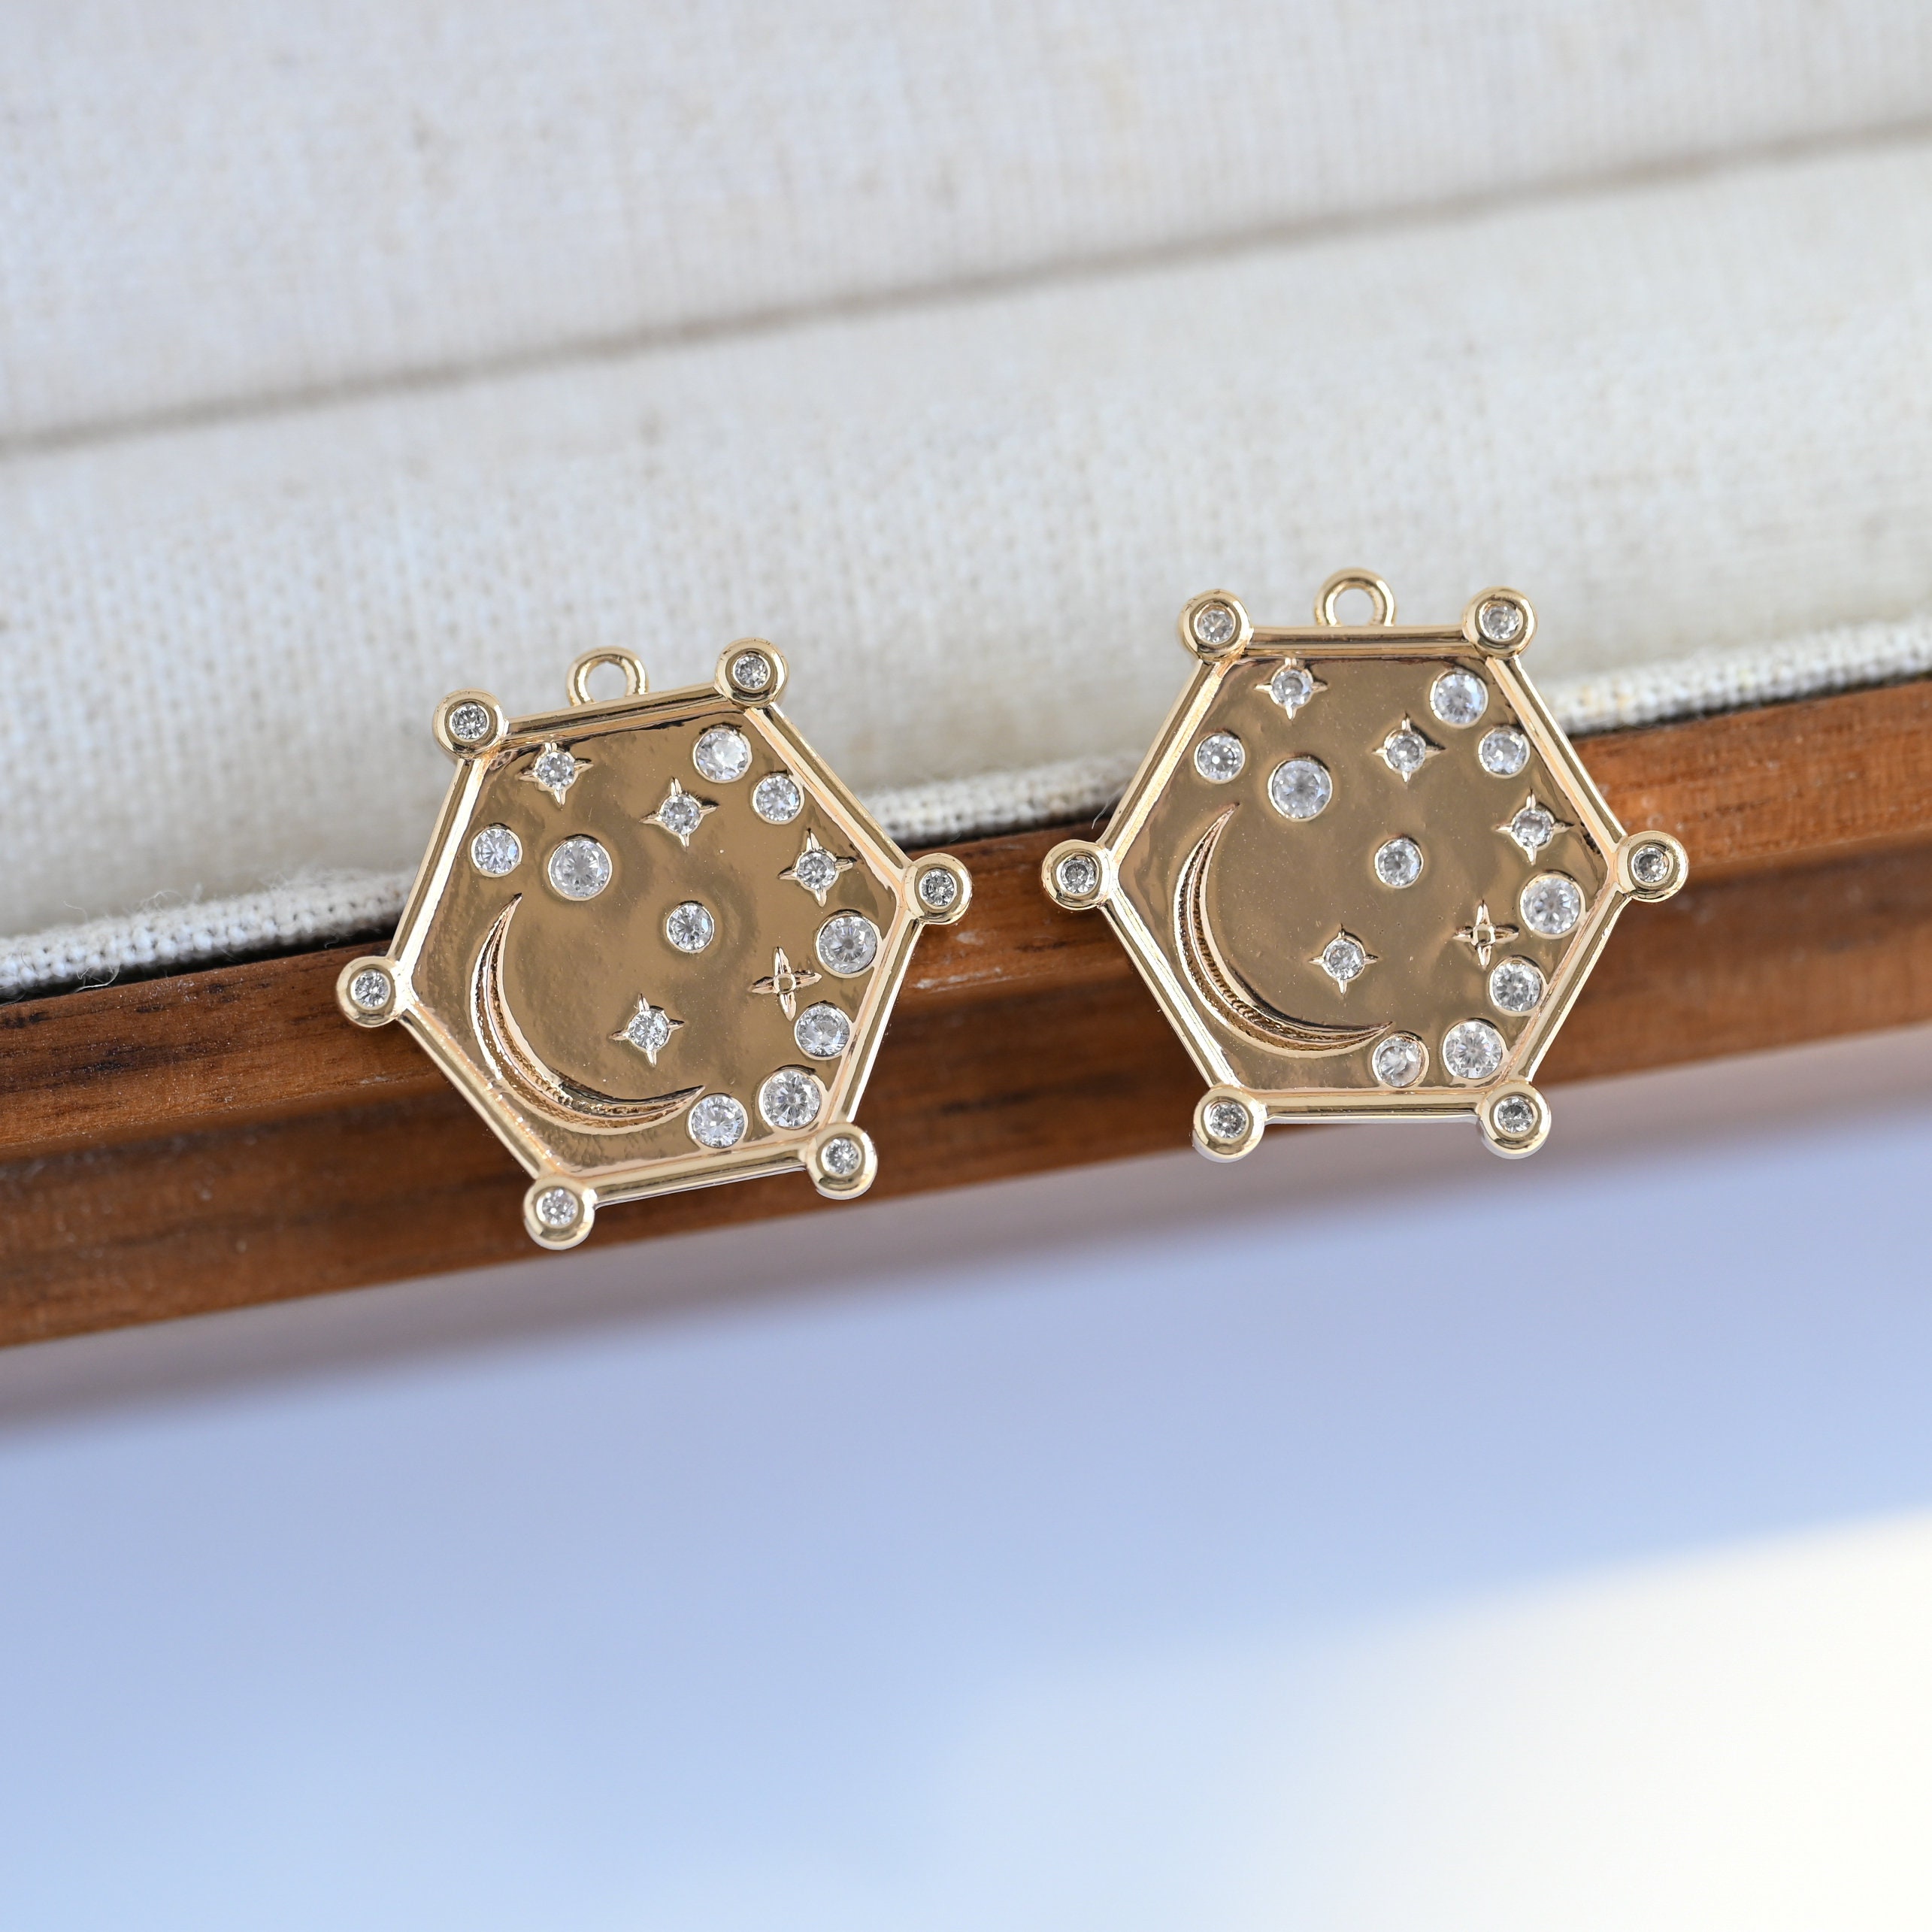 Hexagon Brass Charm, Resin Charms for Jewelry Making, Connector